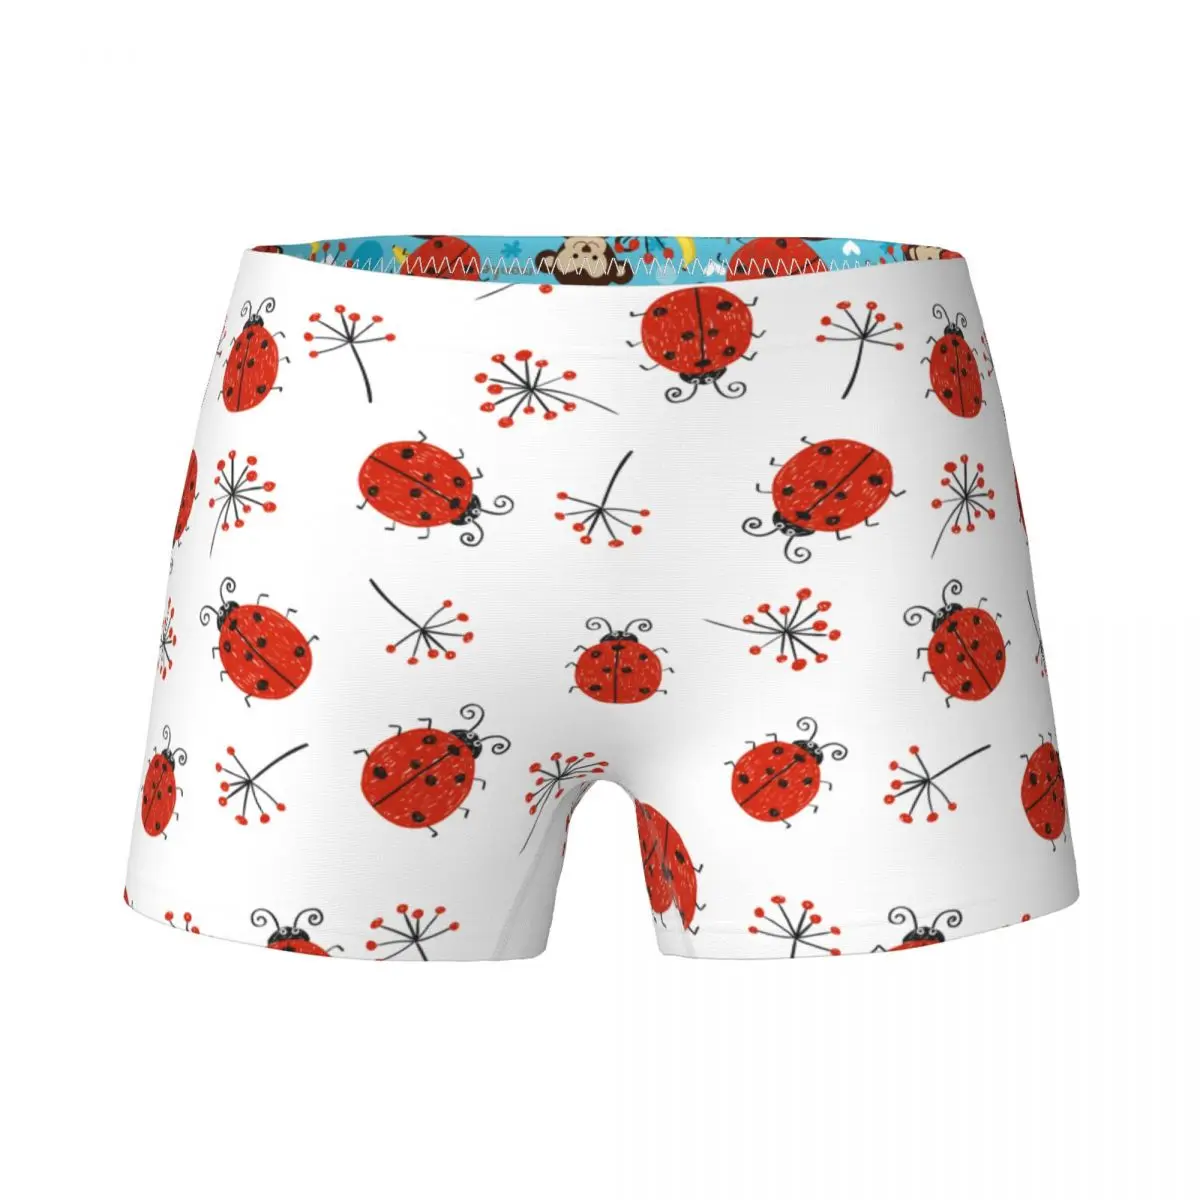 

Ladybug Ladybird Insect Child Girls Underwear Kids Cute Boxer Shorts Breathable Cotton Teenagers Panties Underpants Size 4T-15T